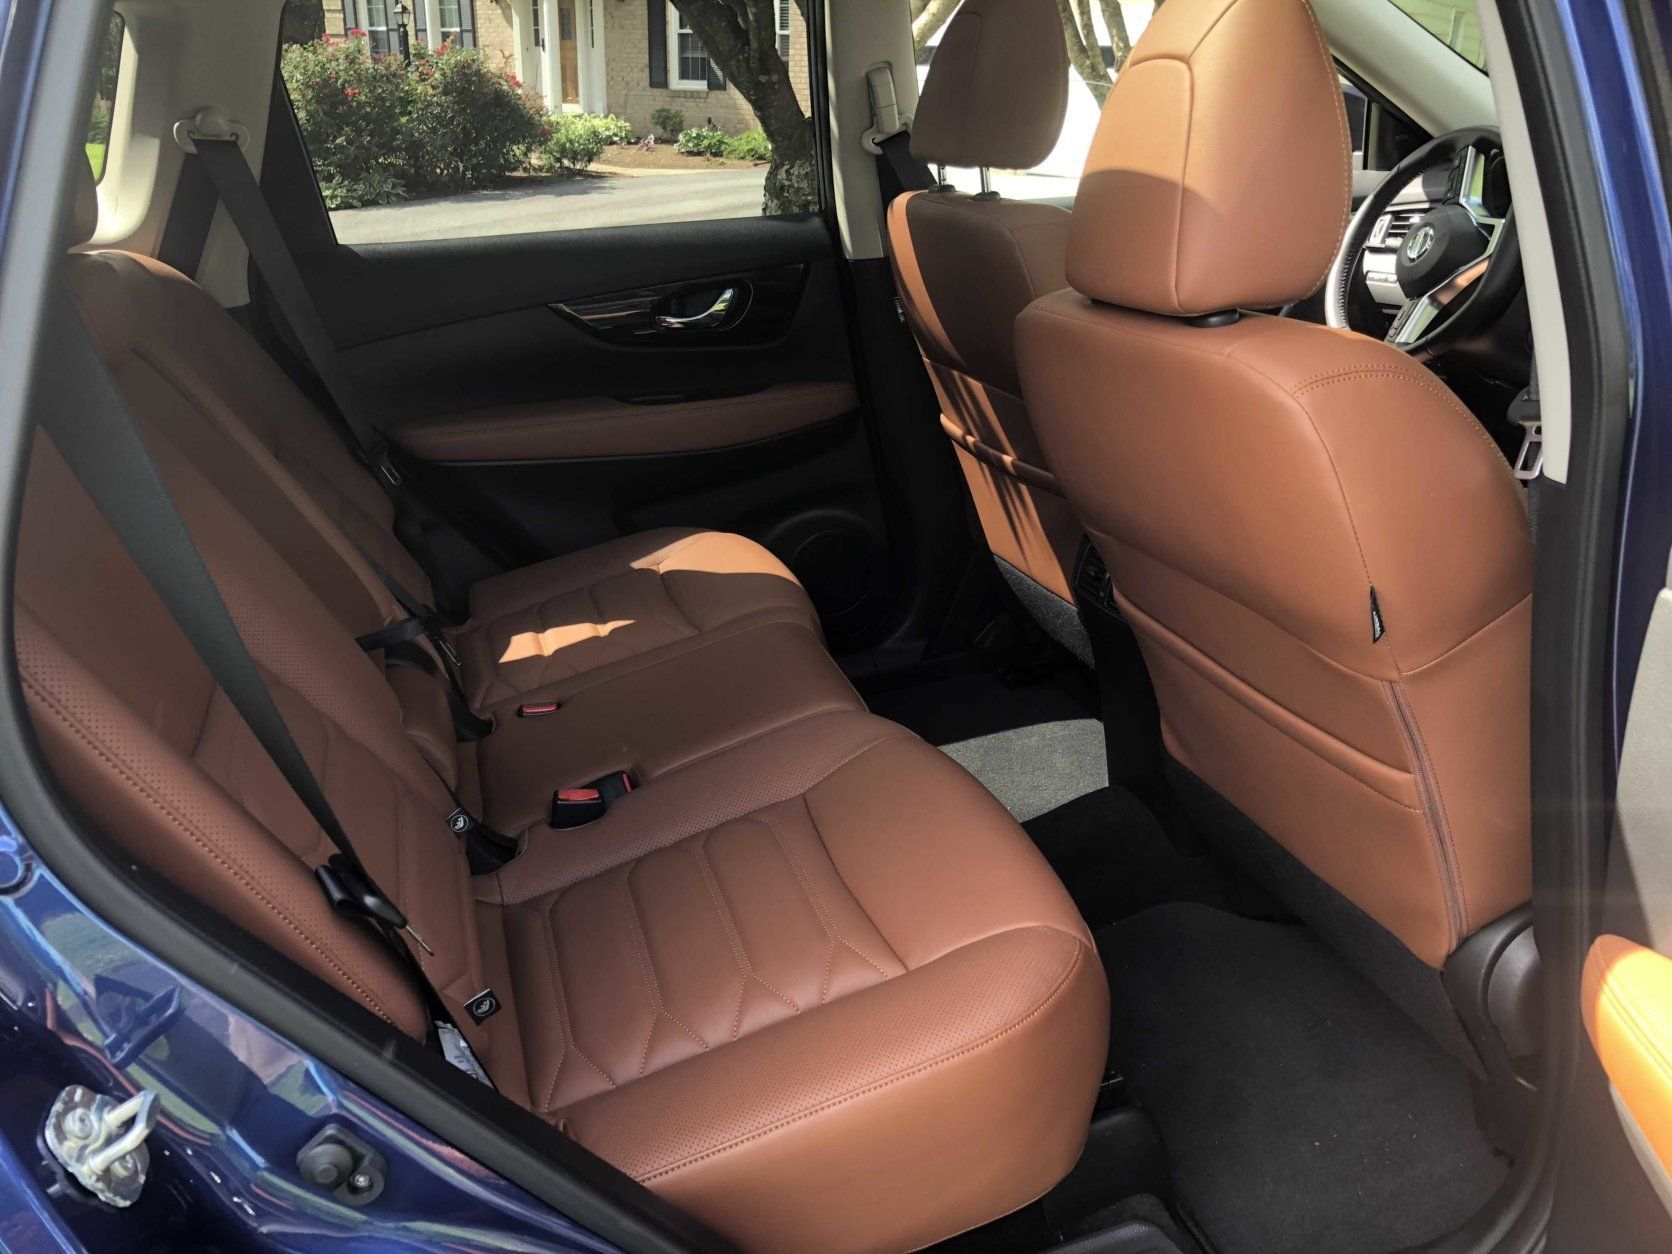 There's a lot of good news inside the Nissan Rogue SL with a high quality interior with nice fit and finish. (WTOP/Mike Parris)